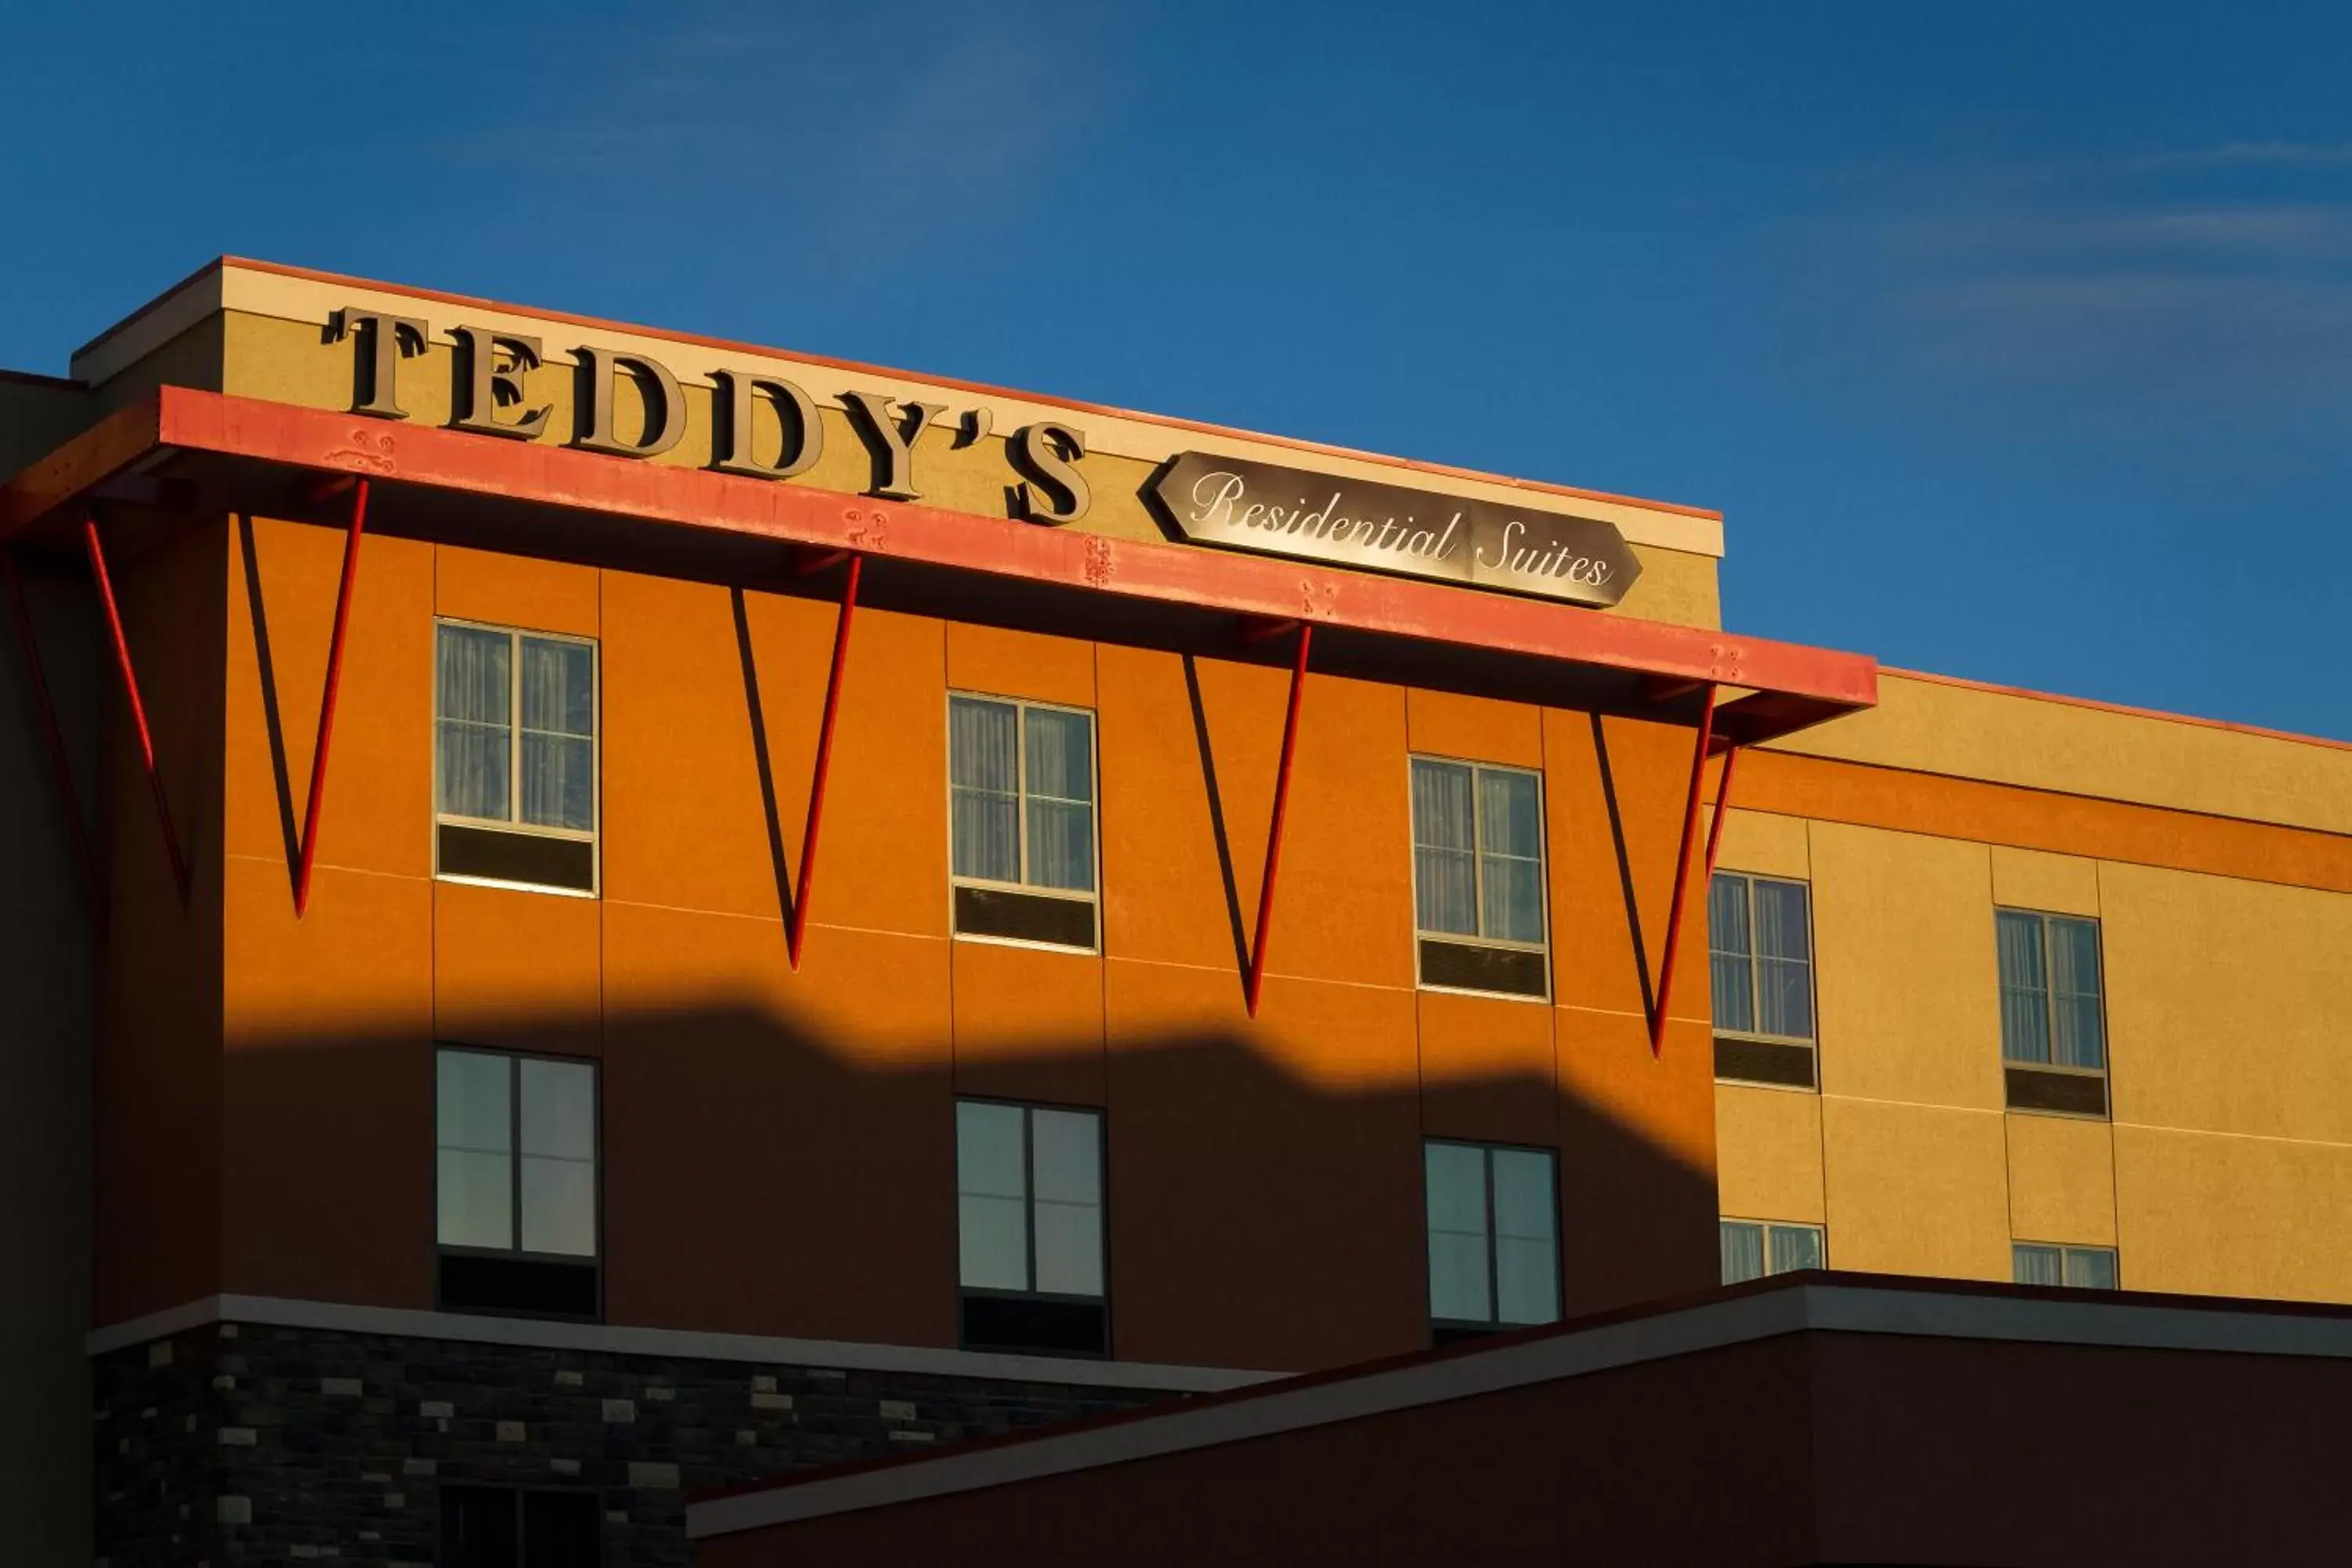 Property building in Teddy's Residential Suites New Town